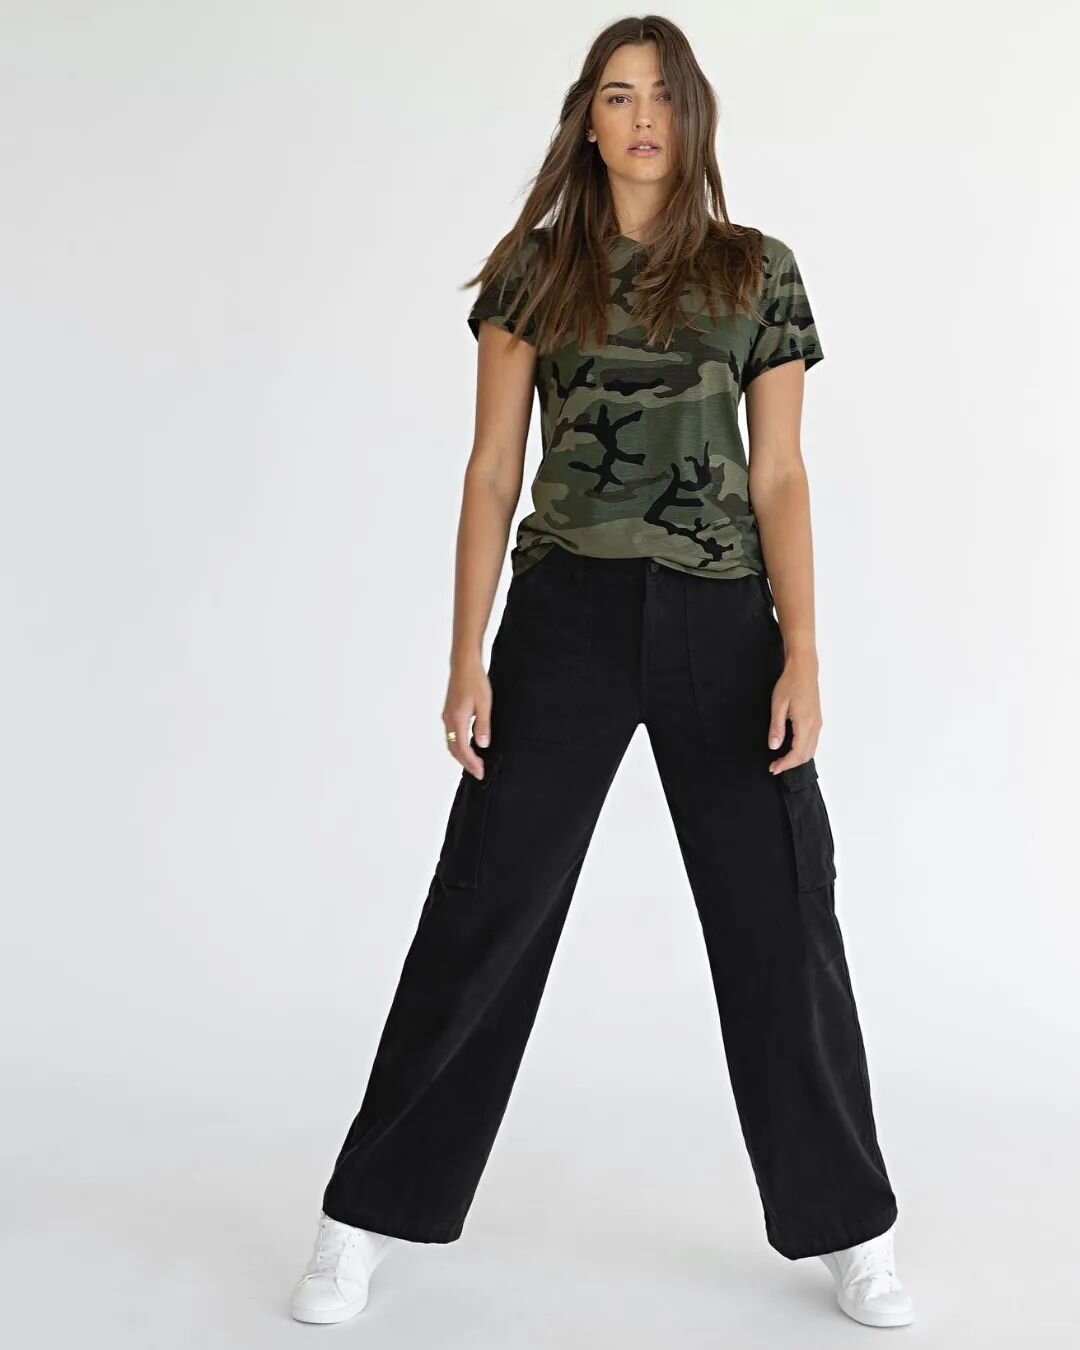 #RozSays it is a perfect T and cargo kinda day! 

#seeyouatcoco #cocoanexperience #206bellevueave #uppermontclairnj #peace #love #fashion 

Introducing Elevated Utility Wear 💚 Super wearable and beyond cool, our new take on utility includes camo pri